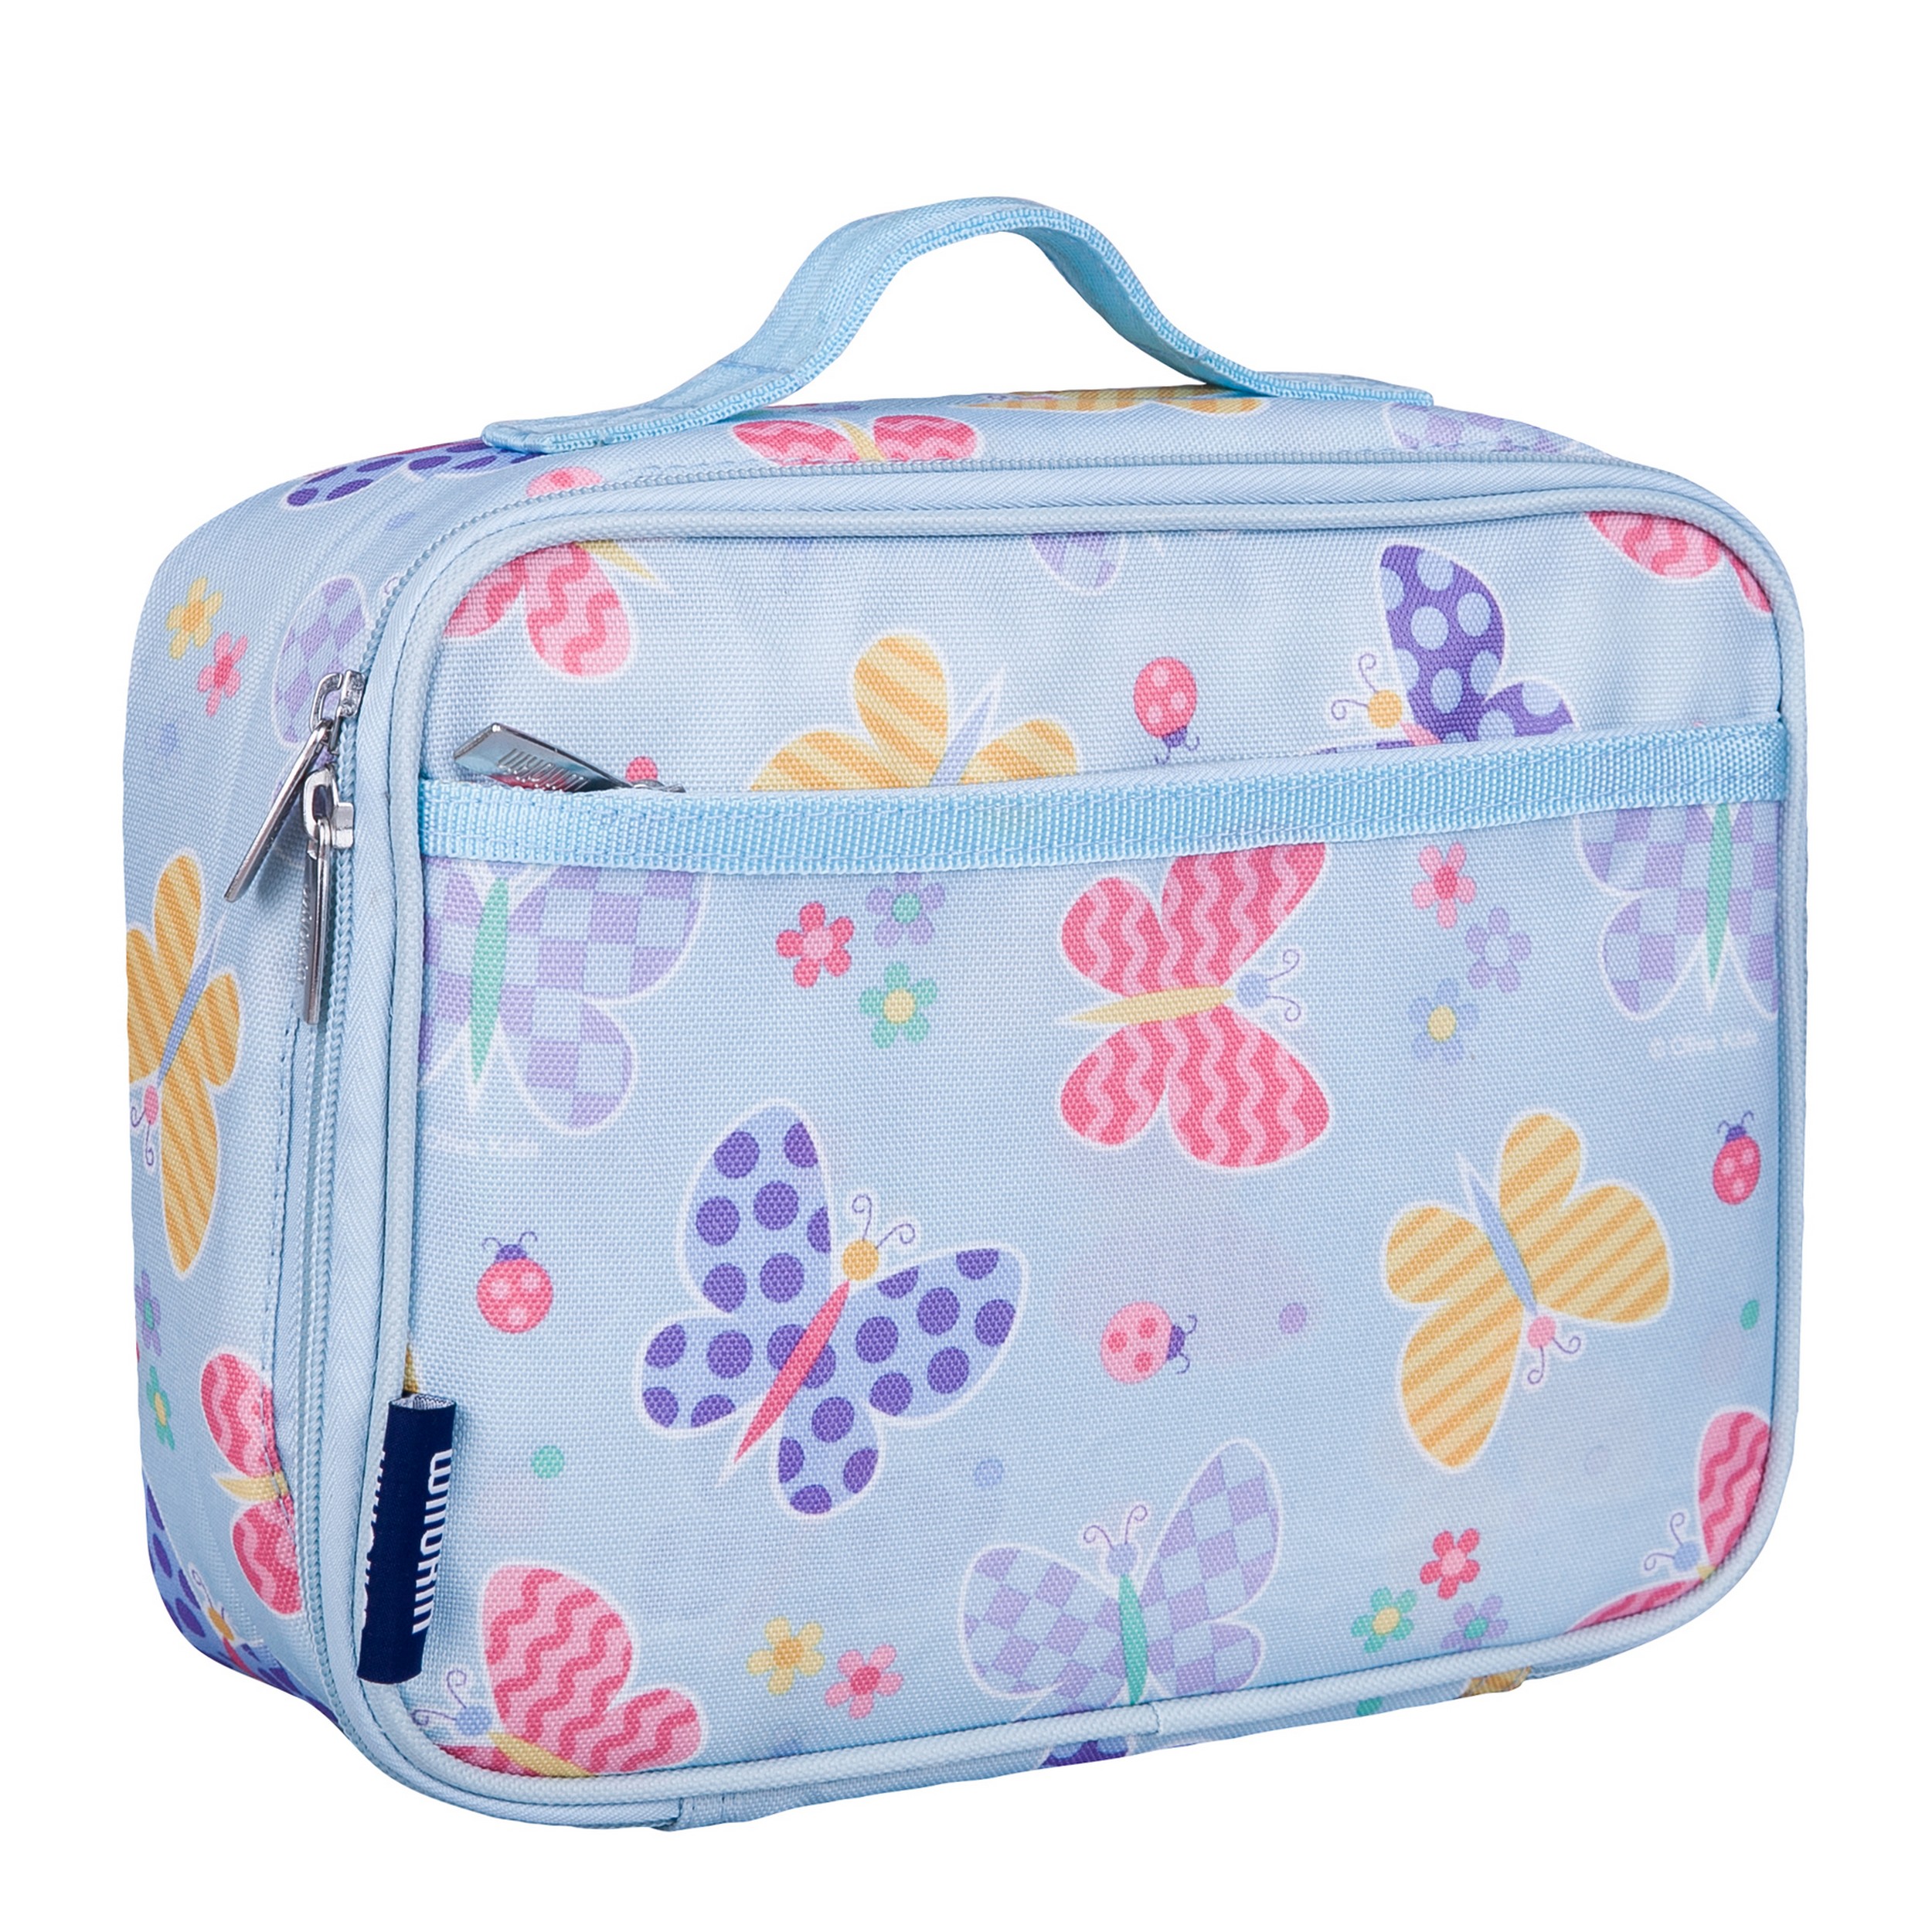 Wildkin Kids Insulated Lunch Box for Boy and Girls, BPA Free (Butterfly Garden Blue) - image 1 of 8